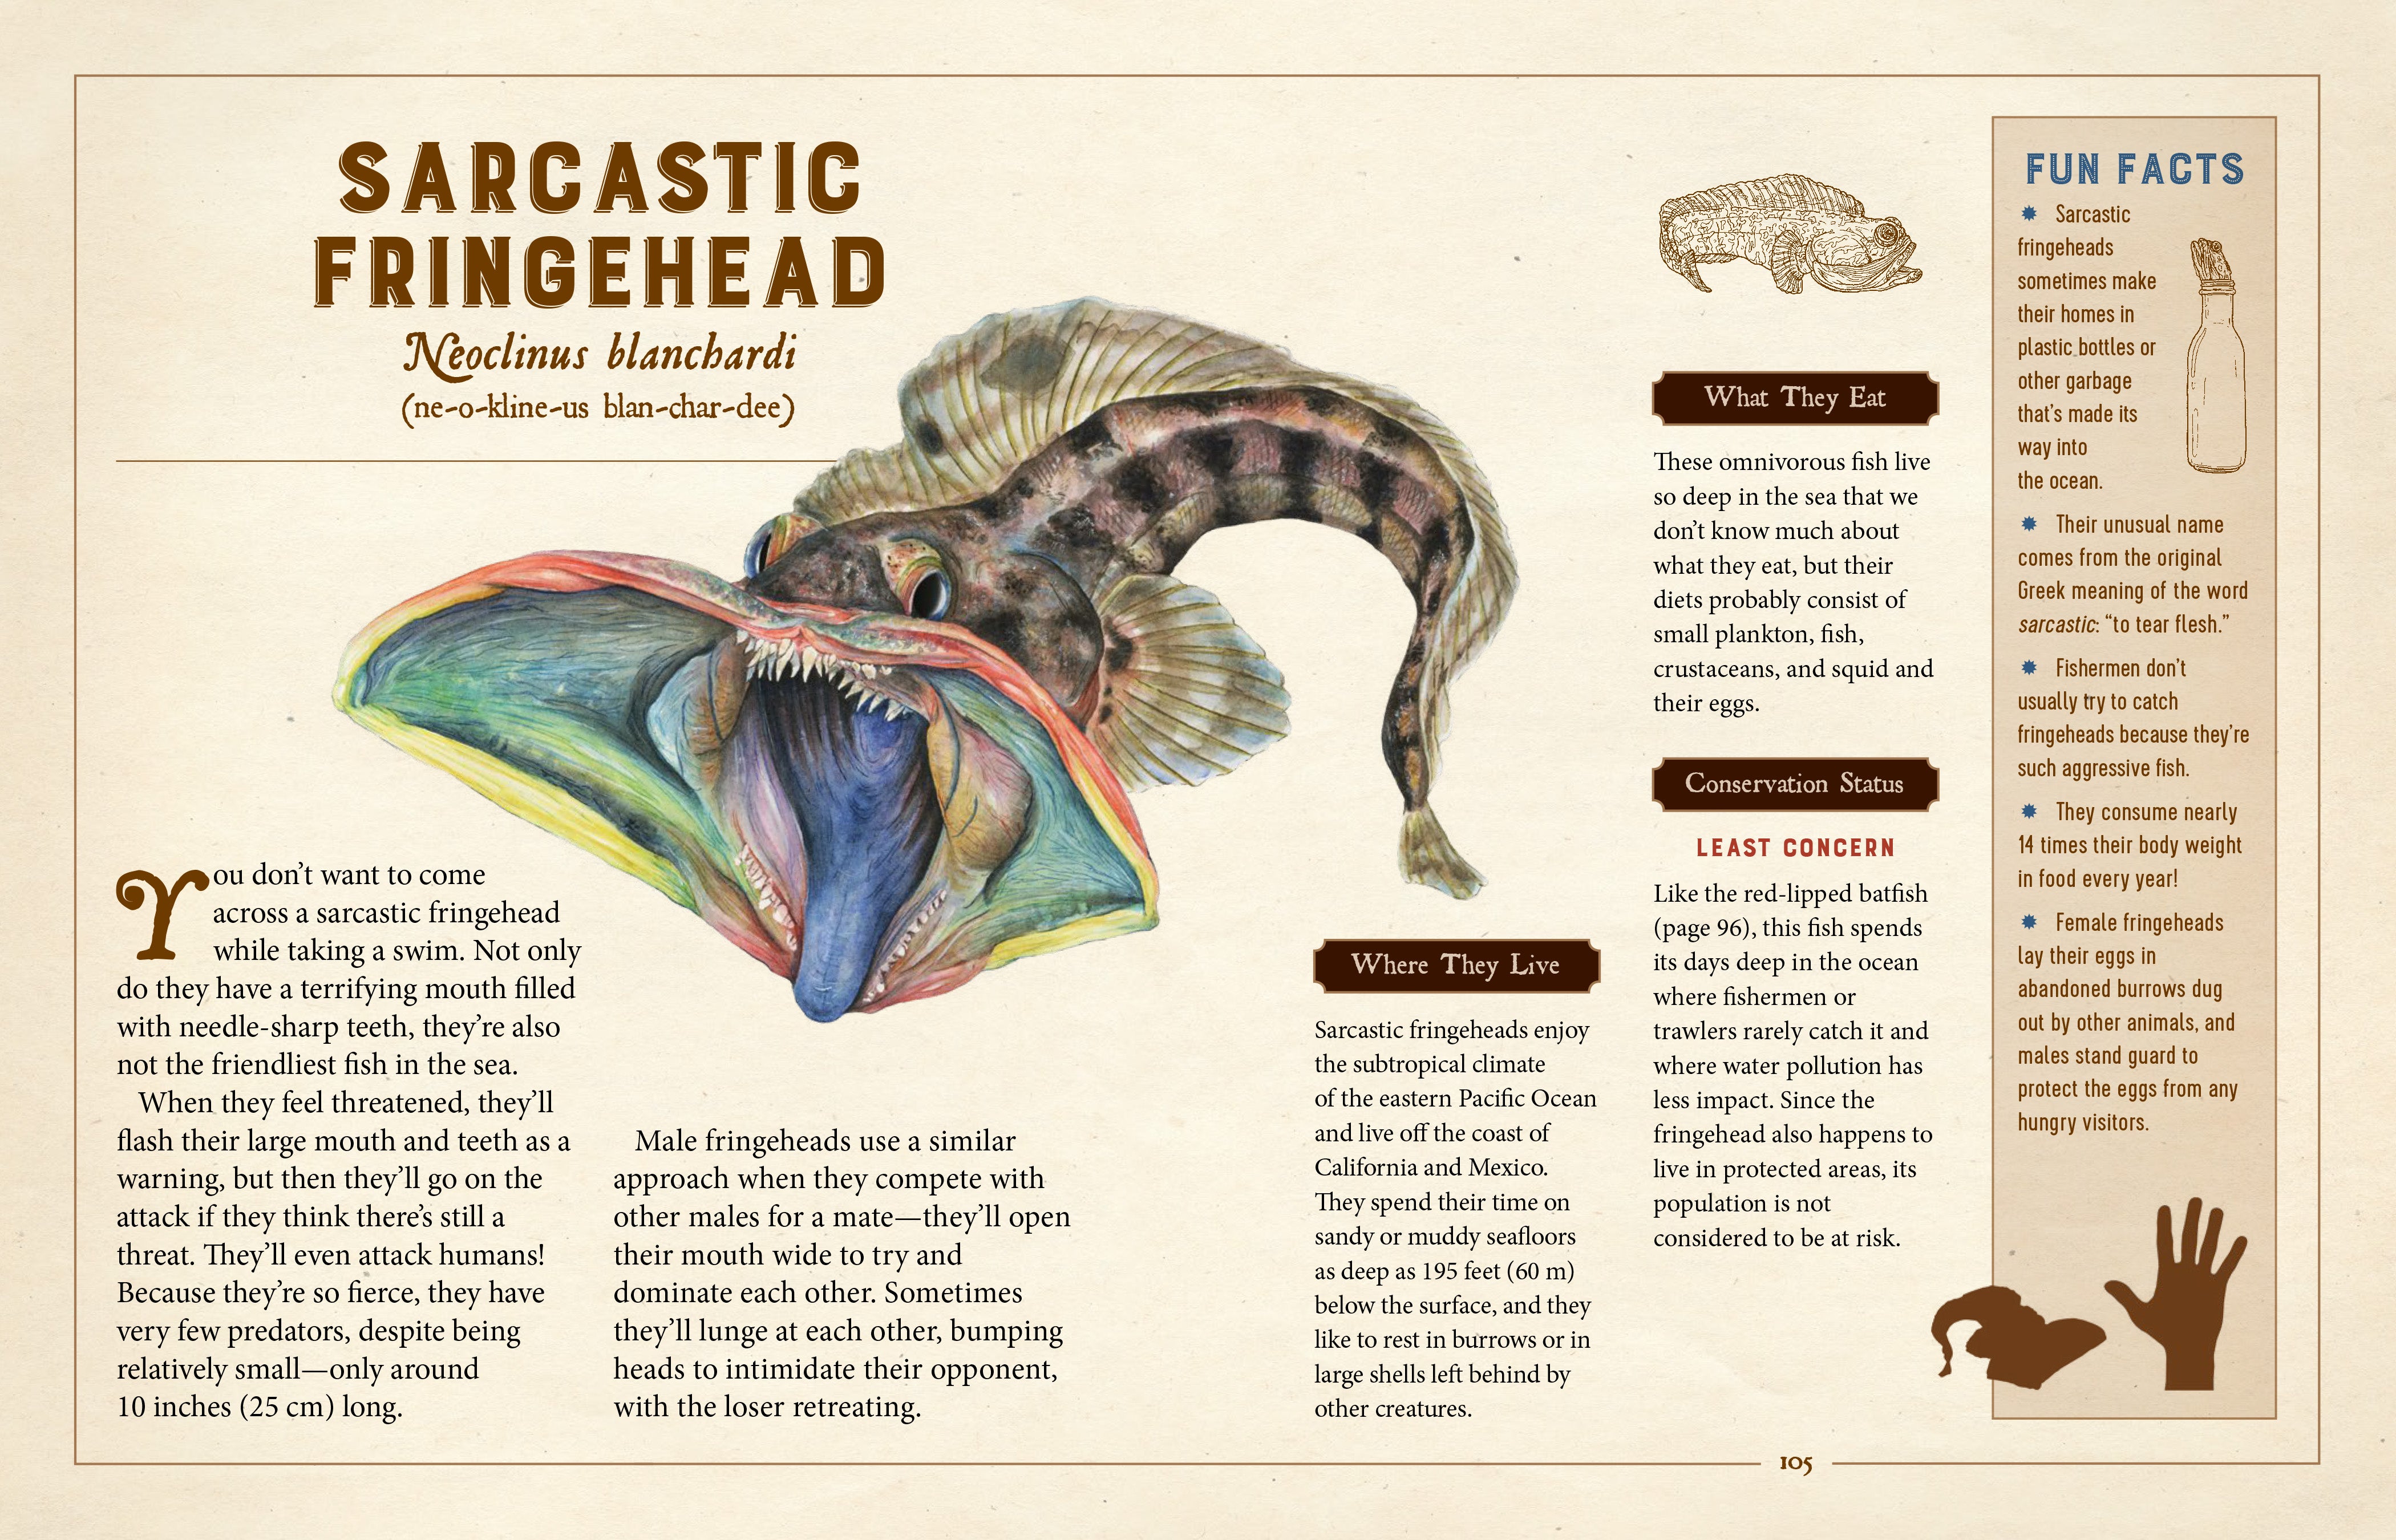 A Curious Collection of Peculiar Creatures - An Illustrated Encyclopedia    